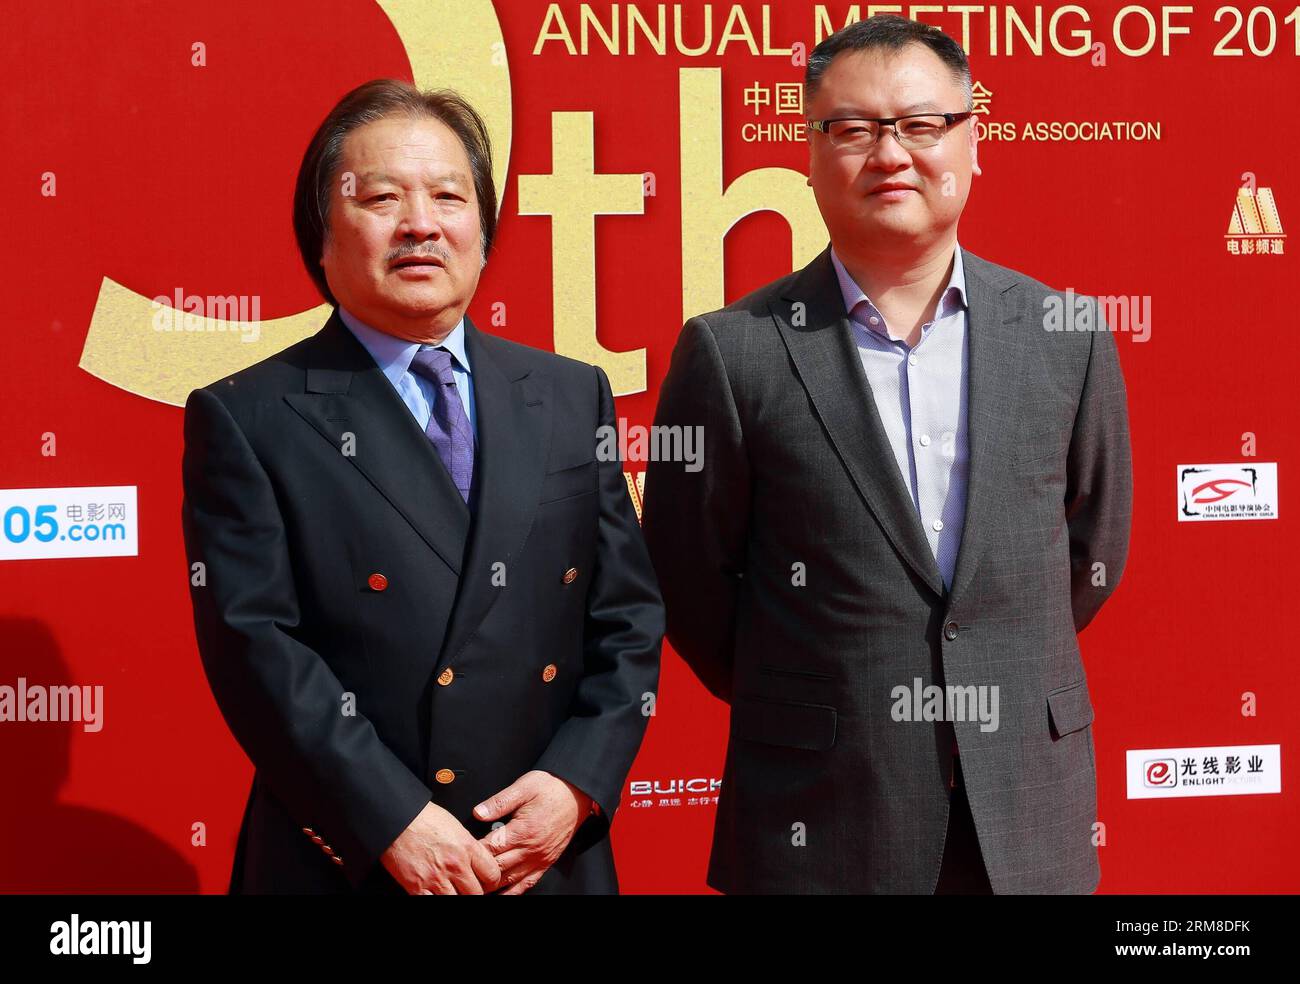 BEIJING,   Teng Wenji (L) and Teng Huatao take part in the 2013 annual commendation conference of China Film Directors Guild in Beijing, capital of China, April 9, 2014. (Xinhua) (zwy) CHINA-BEIJING-COMMENDATION CONFERENCE-CHINA FILM DIRECTORS GUILD(CN) PUBLICATIONxNOTxINxCHN   Beijing Teng Wenji l and Teng  Take Part in The 2013 Annual  Conference of China Film Directors Guild in Beijing Capital of China April 9 2014 XINHUA  China Beijing  Conference China Film Directors Guild CN PUBLICATIONxNOTxINxCHN Stock Photo